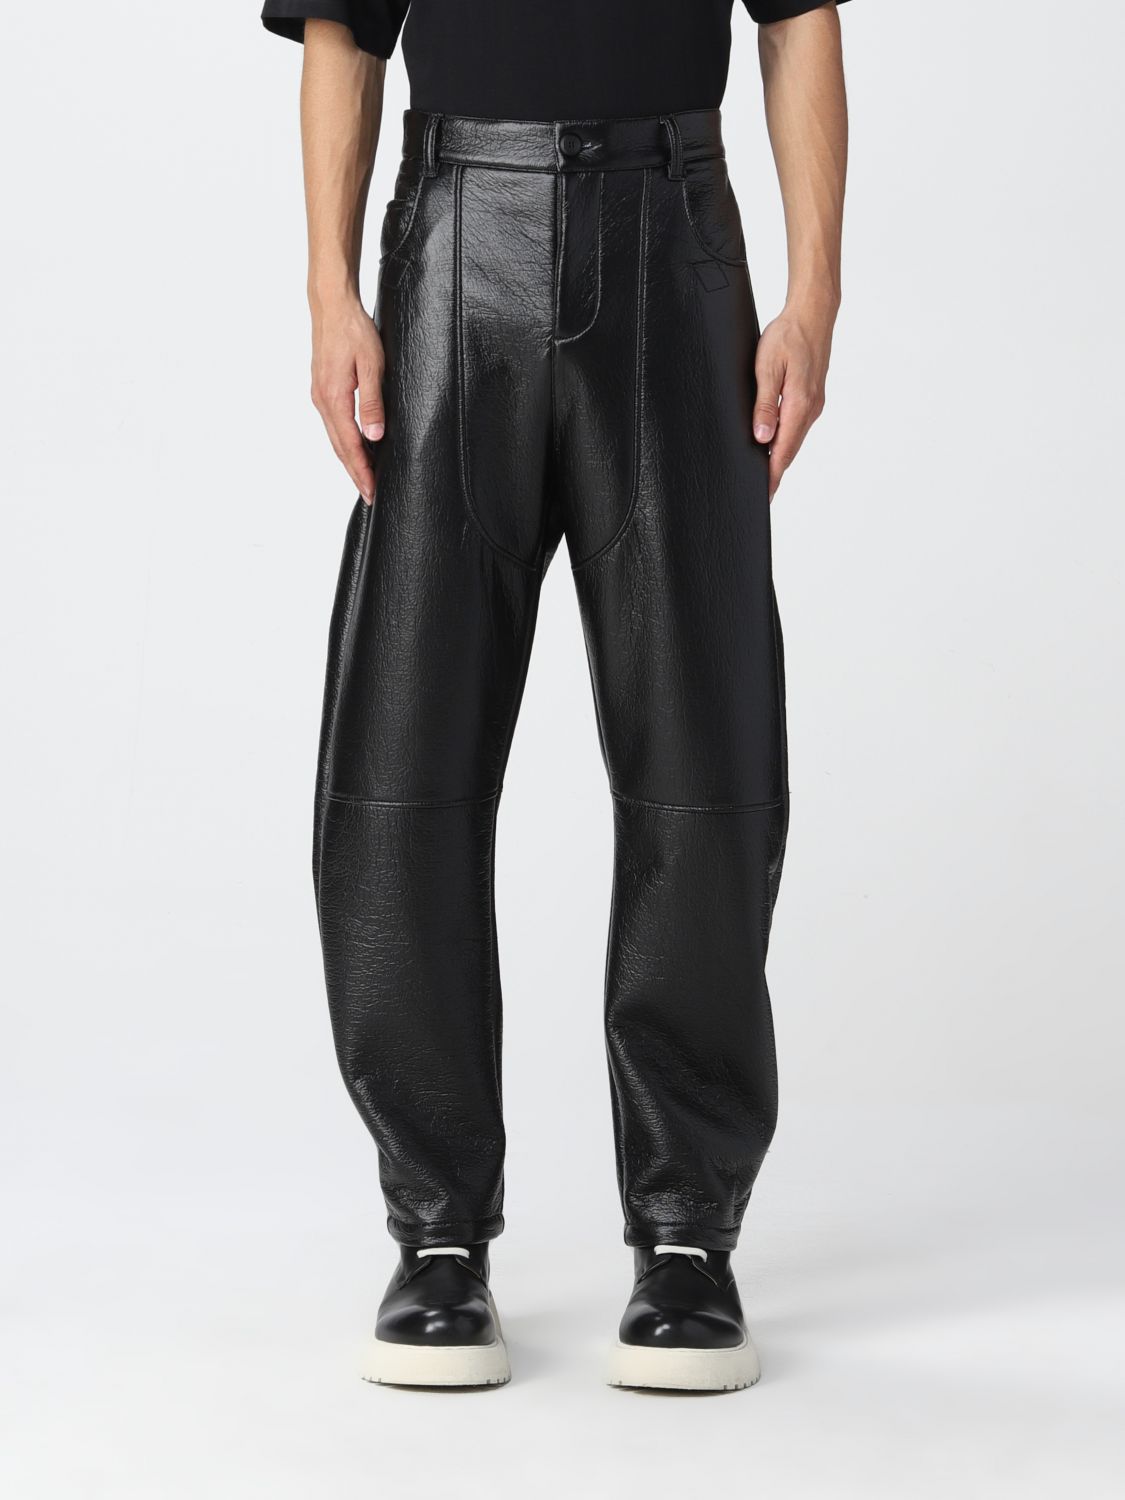 OPENING CEREMONY: pants for man - Black | Opening Ceremony pants ...